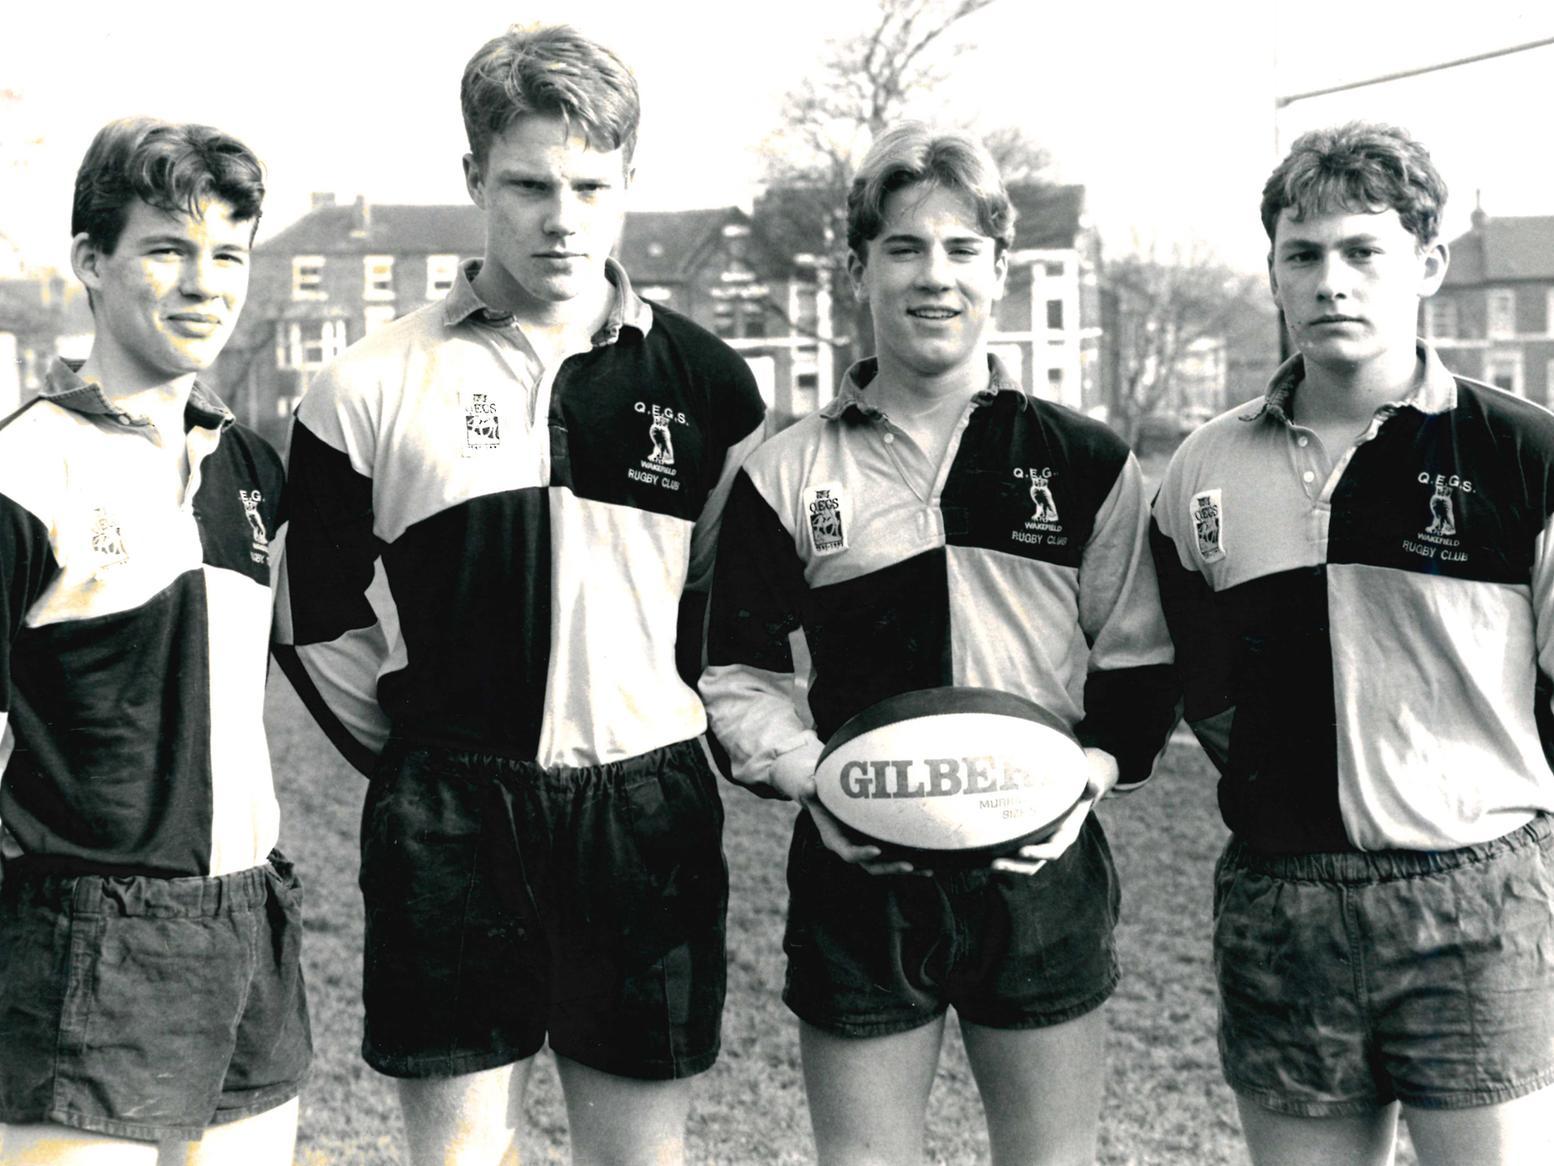 Queen Elizabeth Grammar School. Rugby players. Published in the Wakefield Express 12.2.1993.